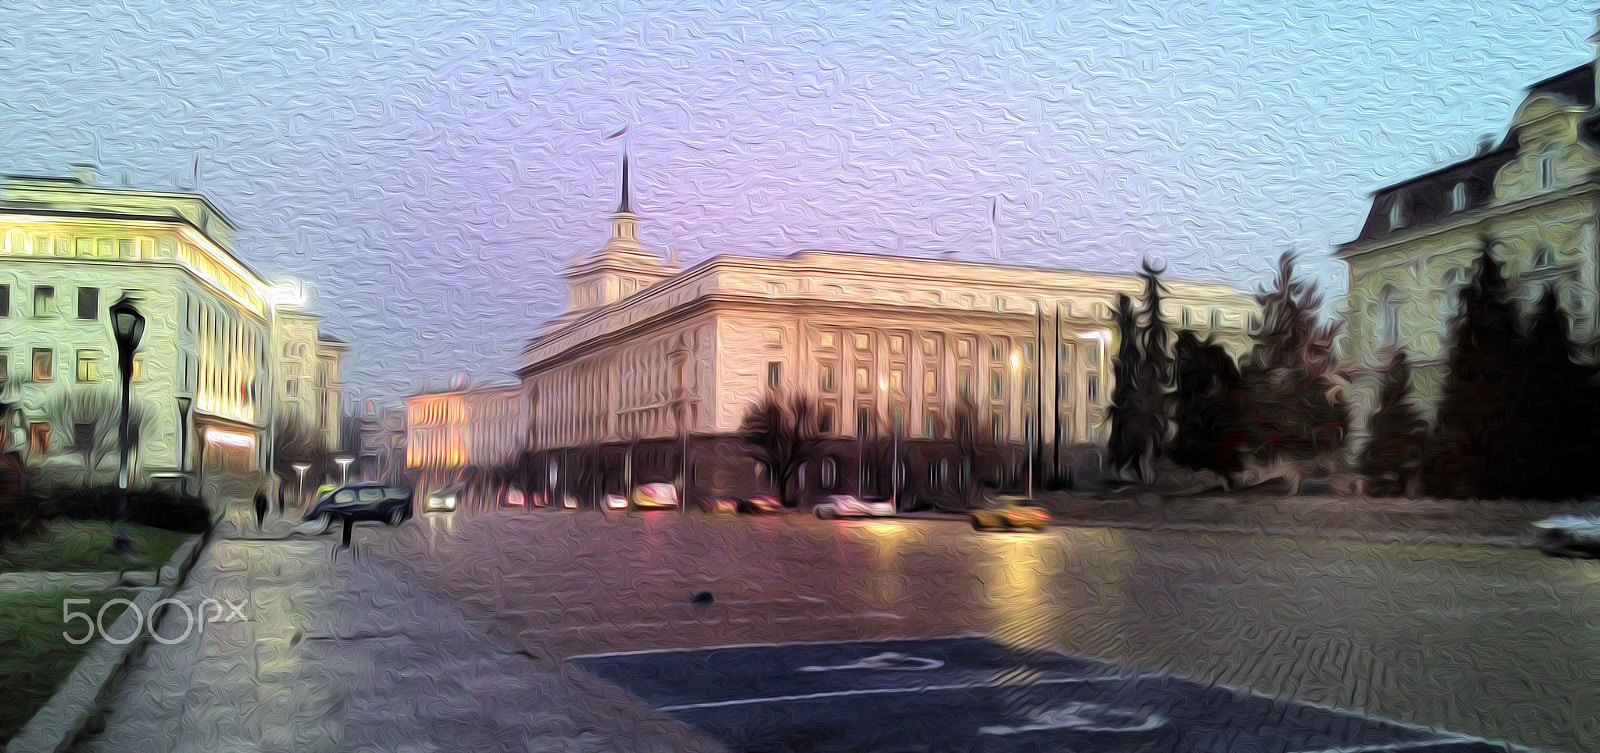 ASUS T00G sample photo. The memory of sofia - travel photography photography